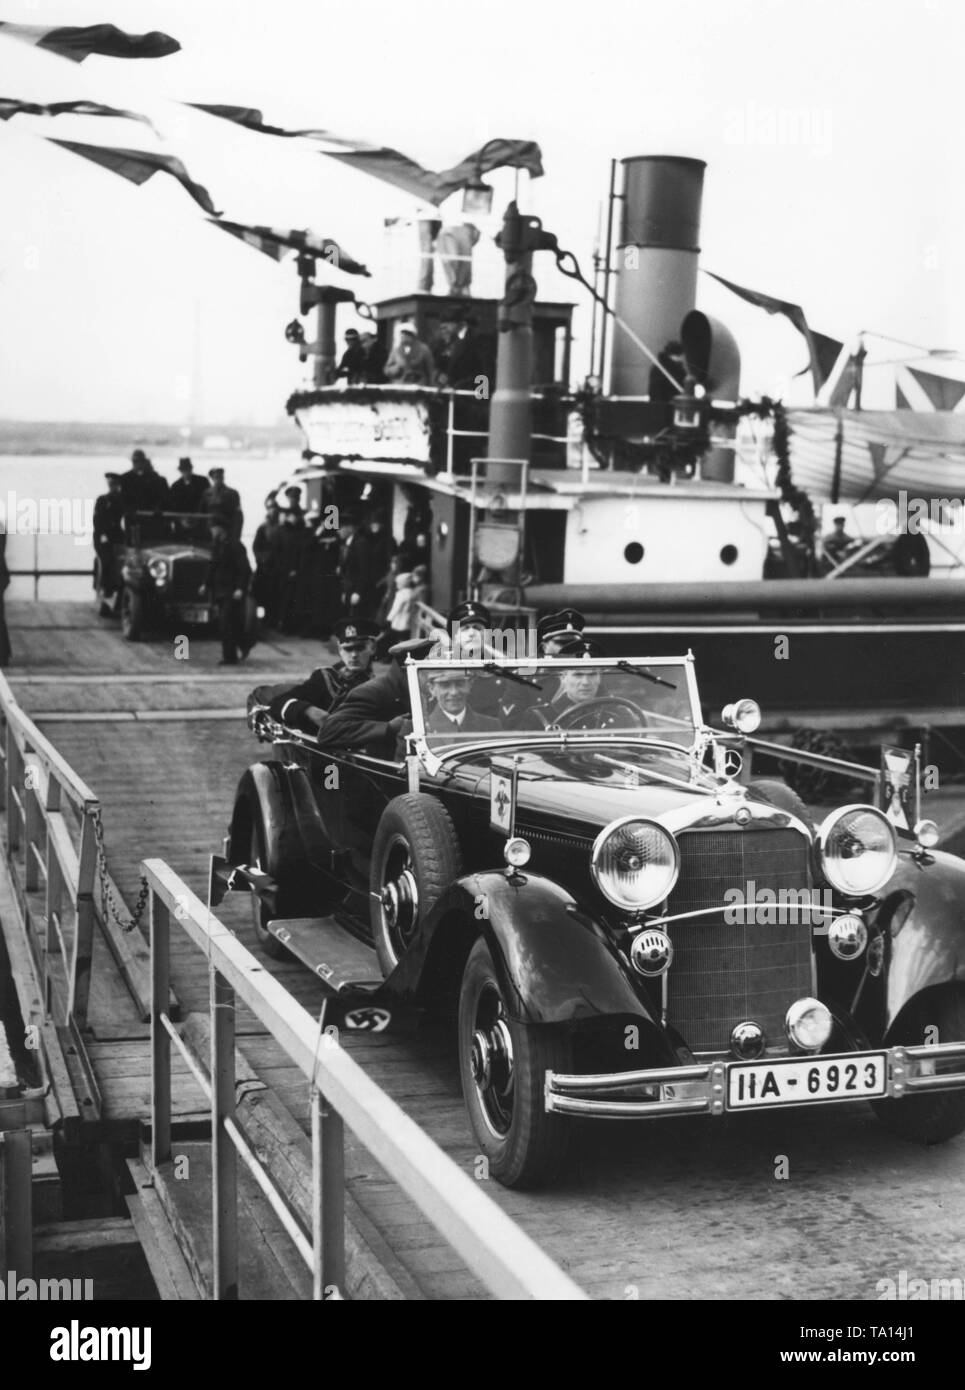 Propaganda Minister Joseph Goebbels is on the way to Neuteich, a municipality in Gdansk, in view of the parliamentary election in Gdansk. This photograph shows Goebbels in the passenger seat, along with other members of the NSDAP on the way to Neuteich. The flags on the car indicate that it is an official car of the NSDAP. Stock Photo